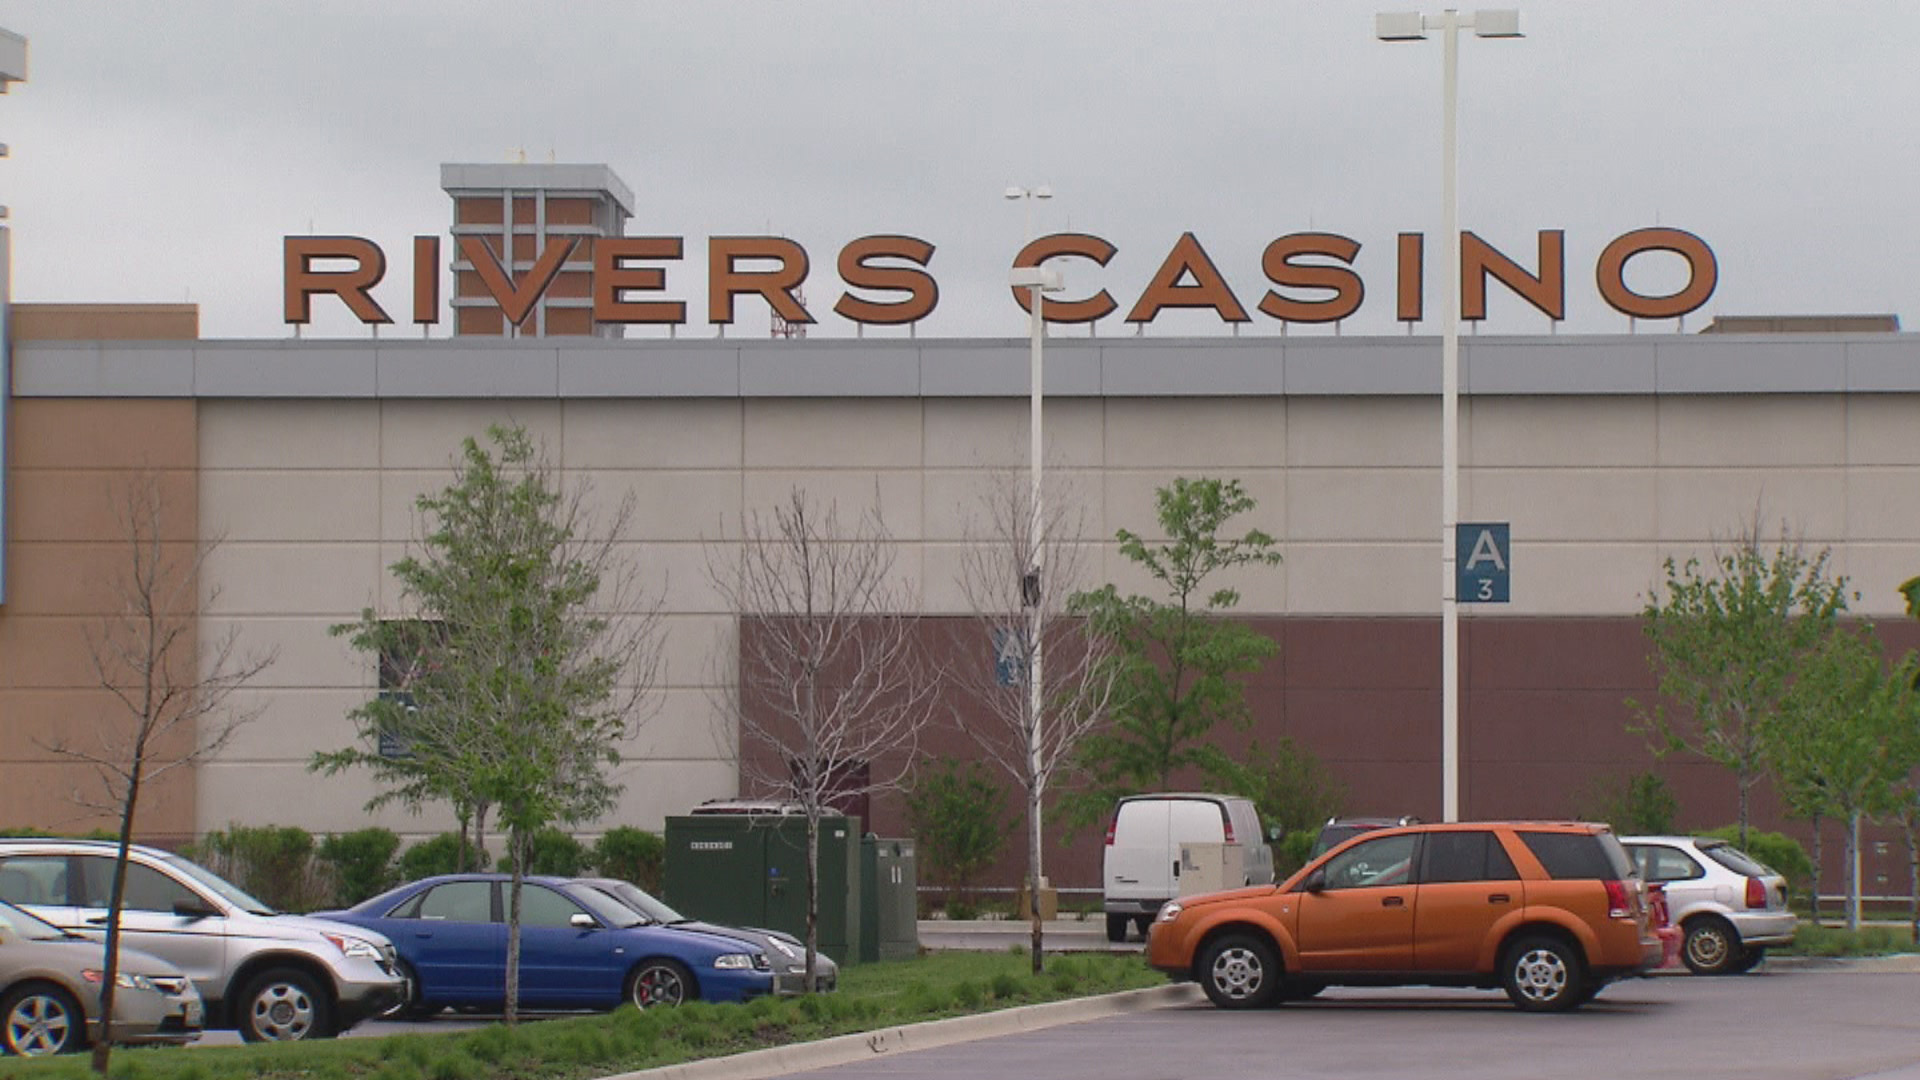 two rivers casino from syracuse